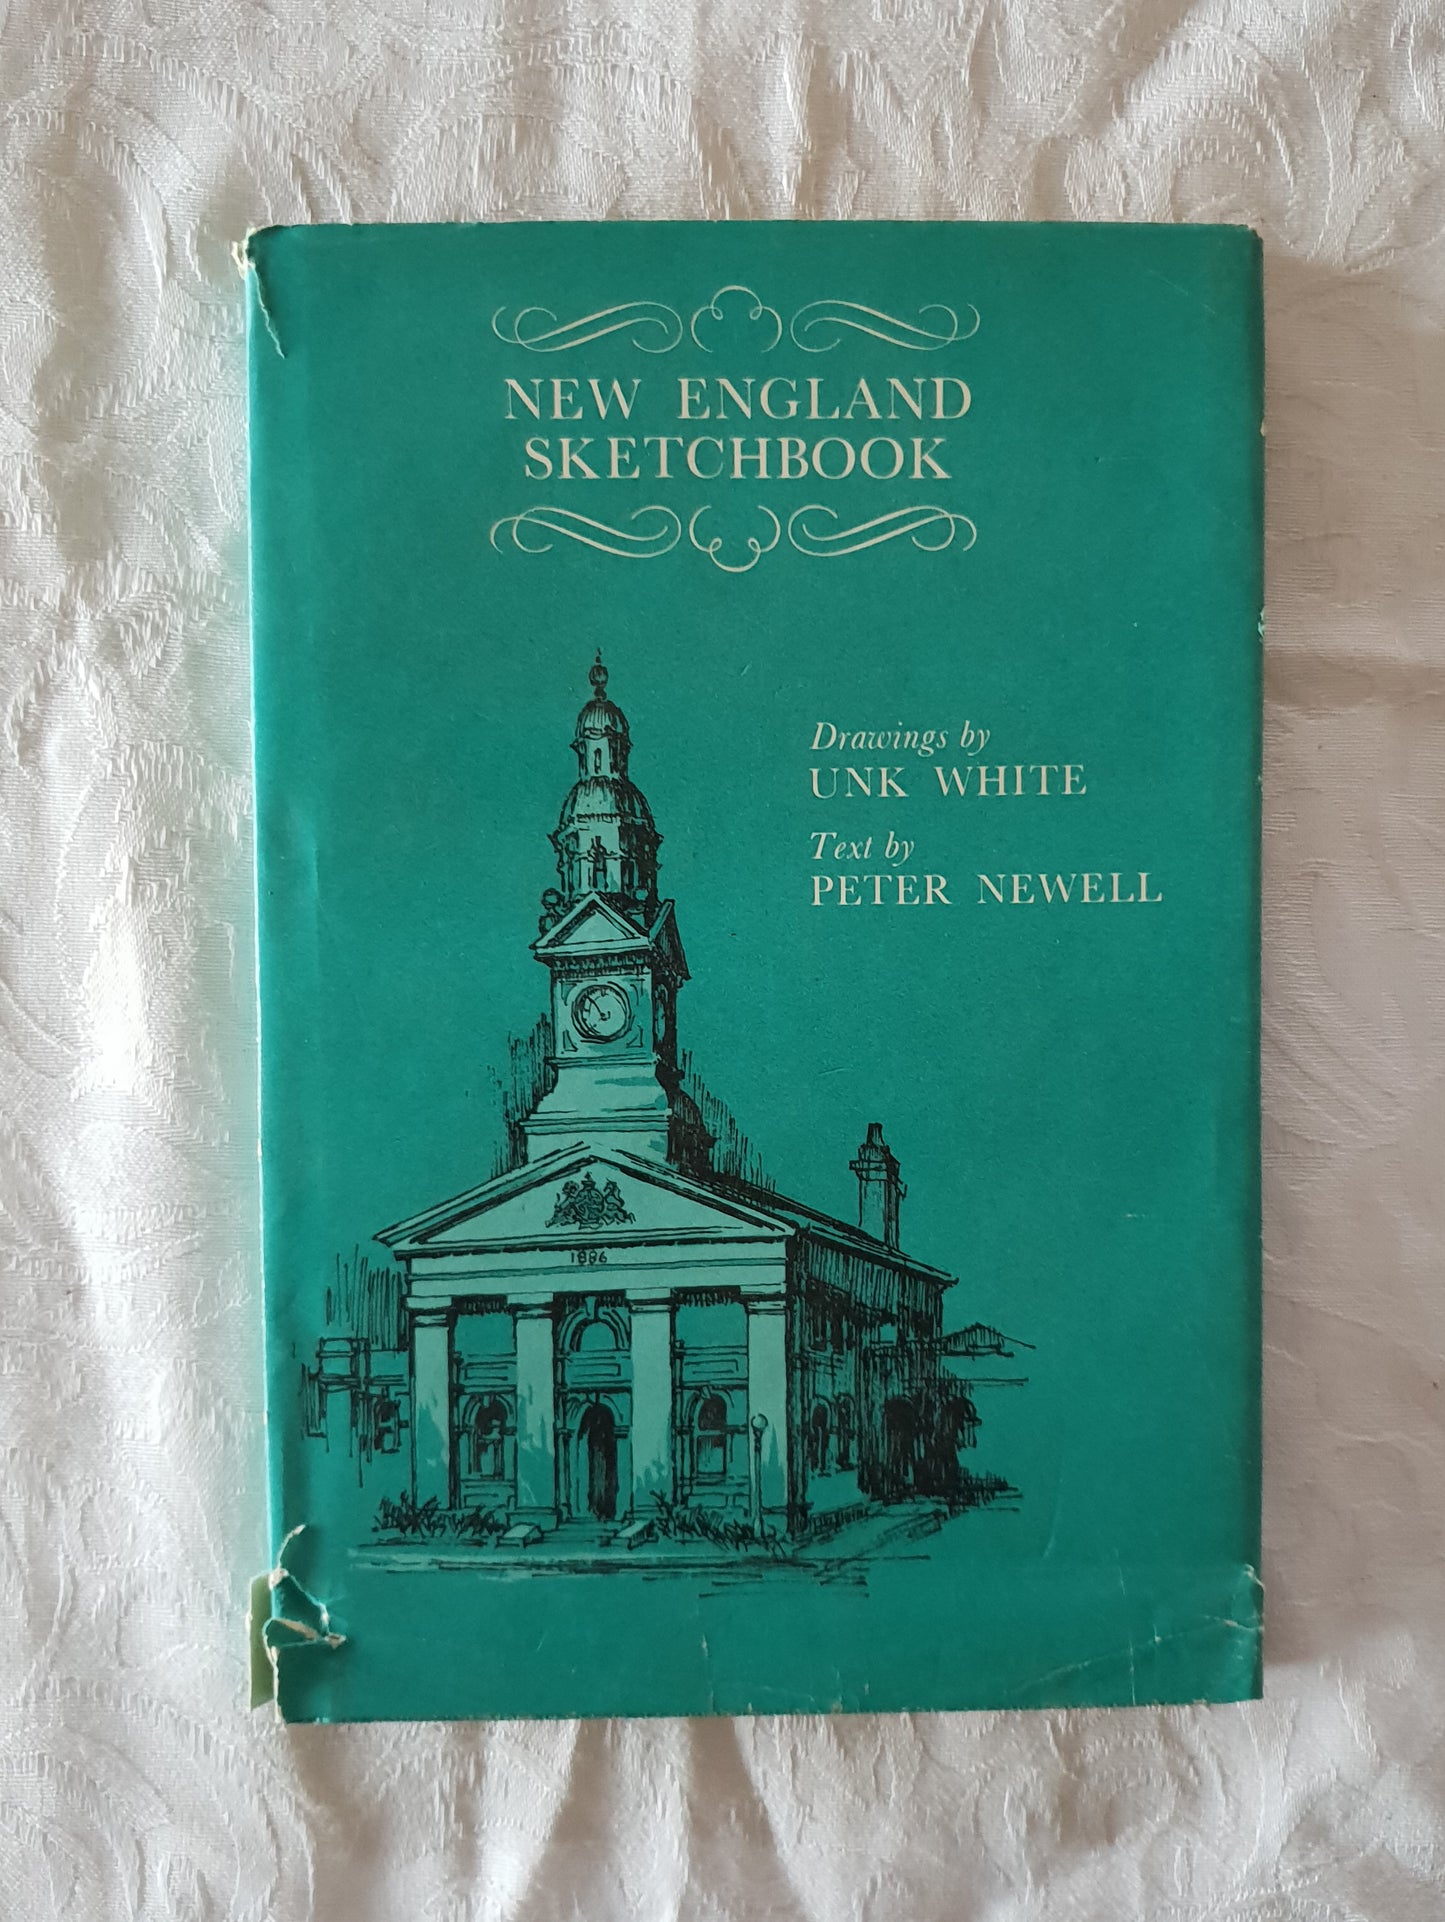 New England Sketchbook  by Unk White and Peter Newell